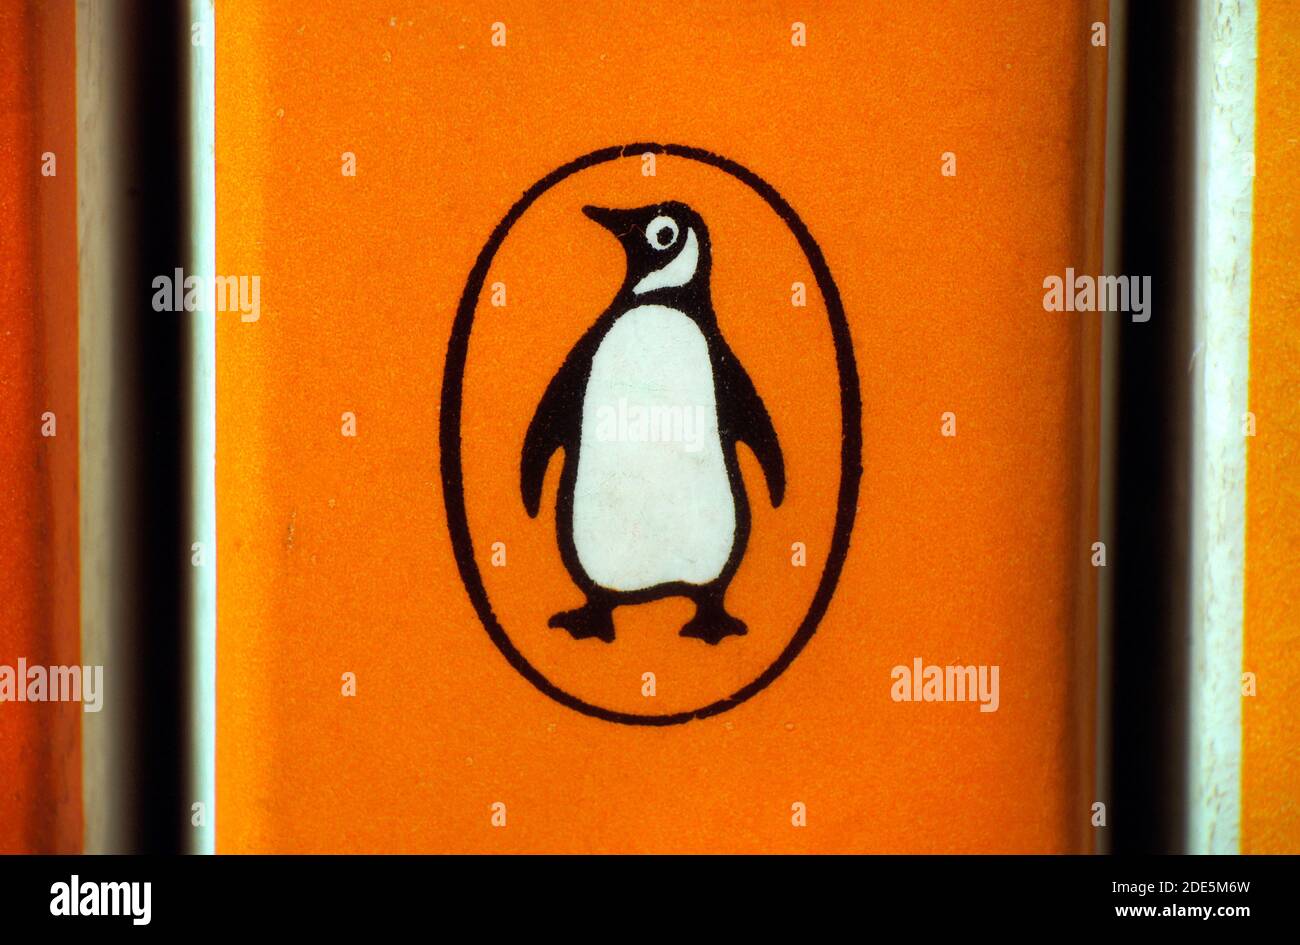 Close-up of Iconic Penguin logo on spine of 1970s orange Penguin paperback. Penguin is now part of the Penguin Random House publishing conglomerate. Stock Photo